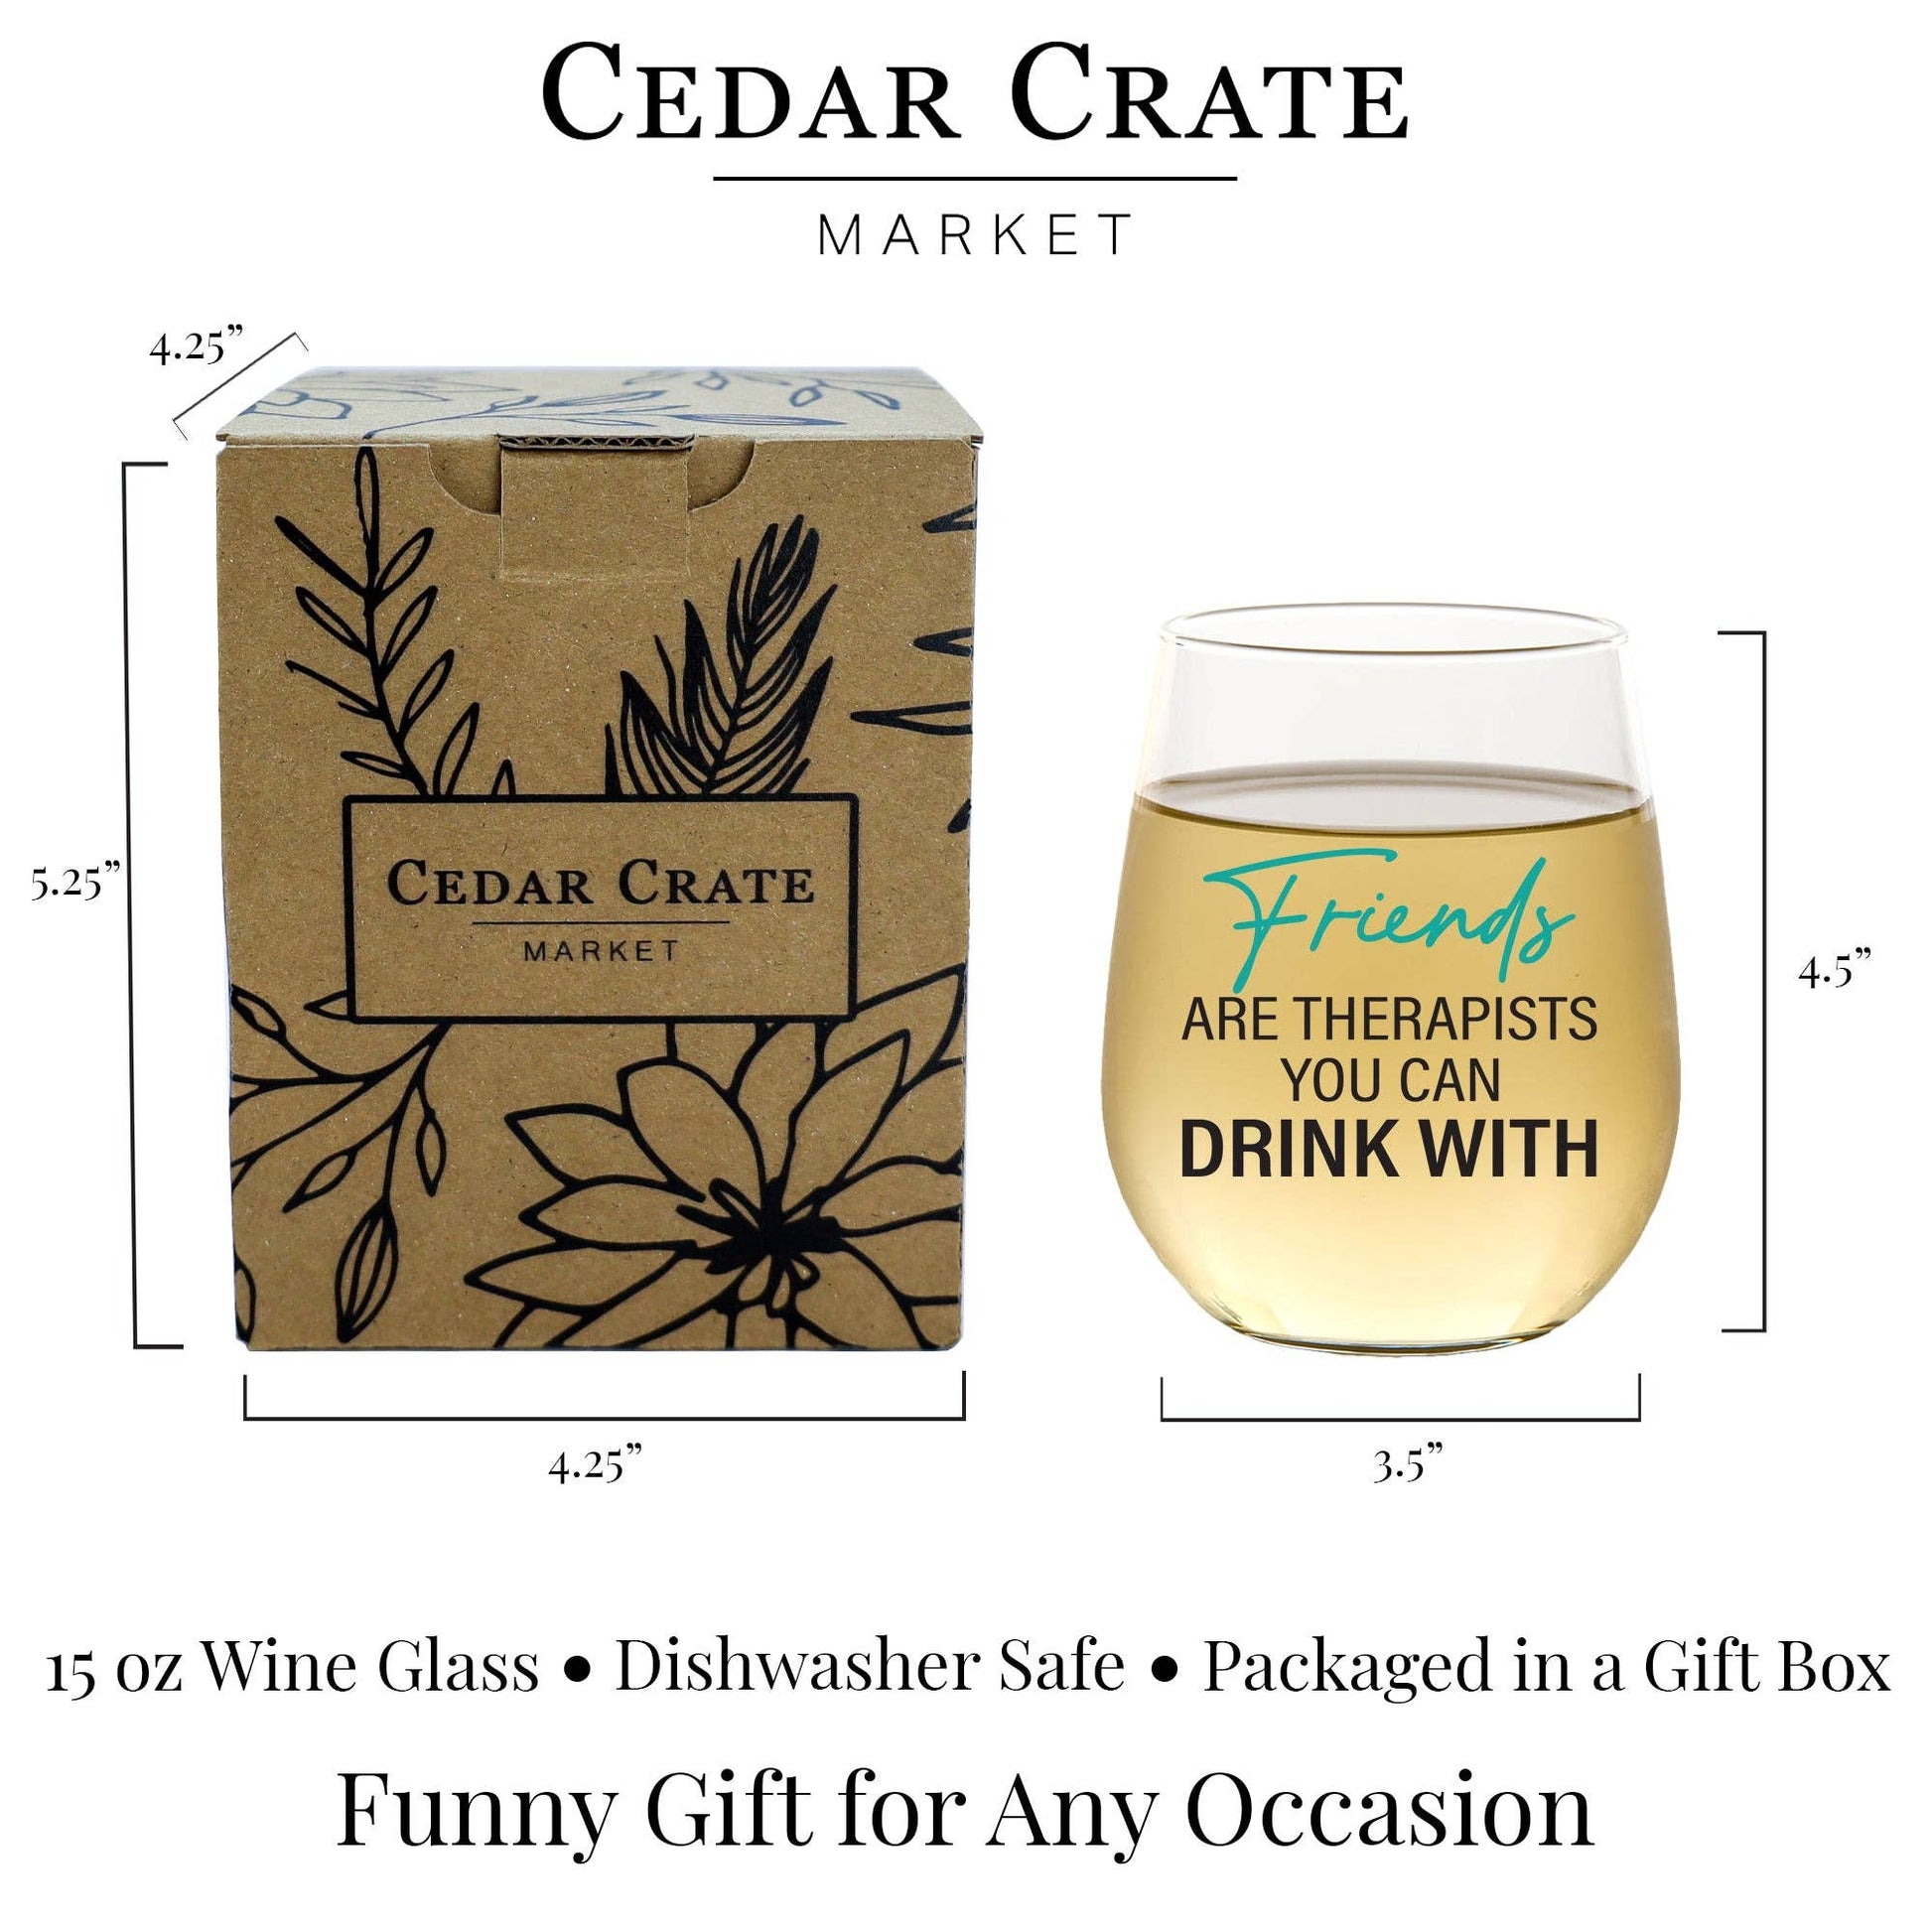 Friends are Therapists You Can Drink With 15oz Wine Glass Core Cedar Crate Market